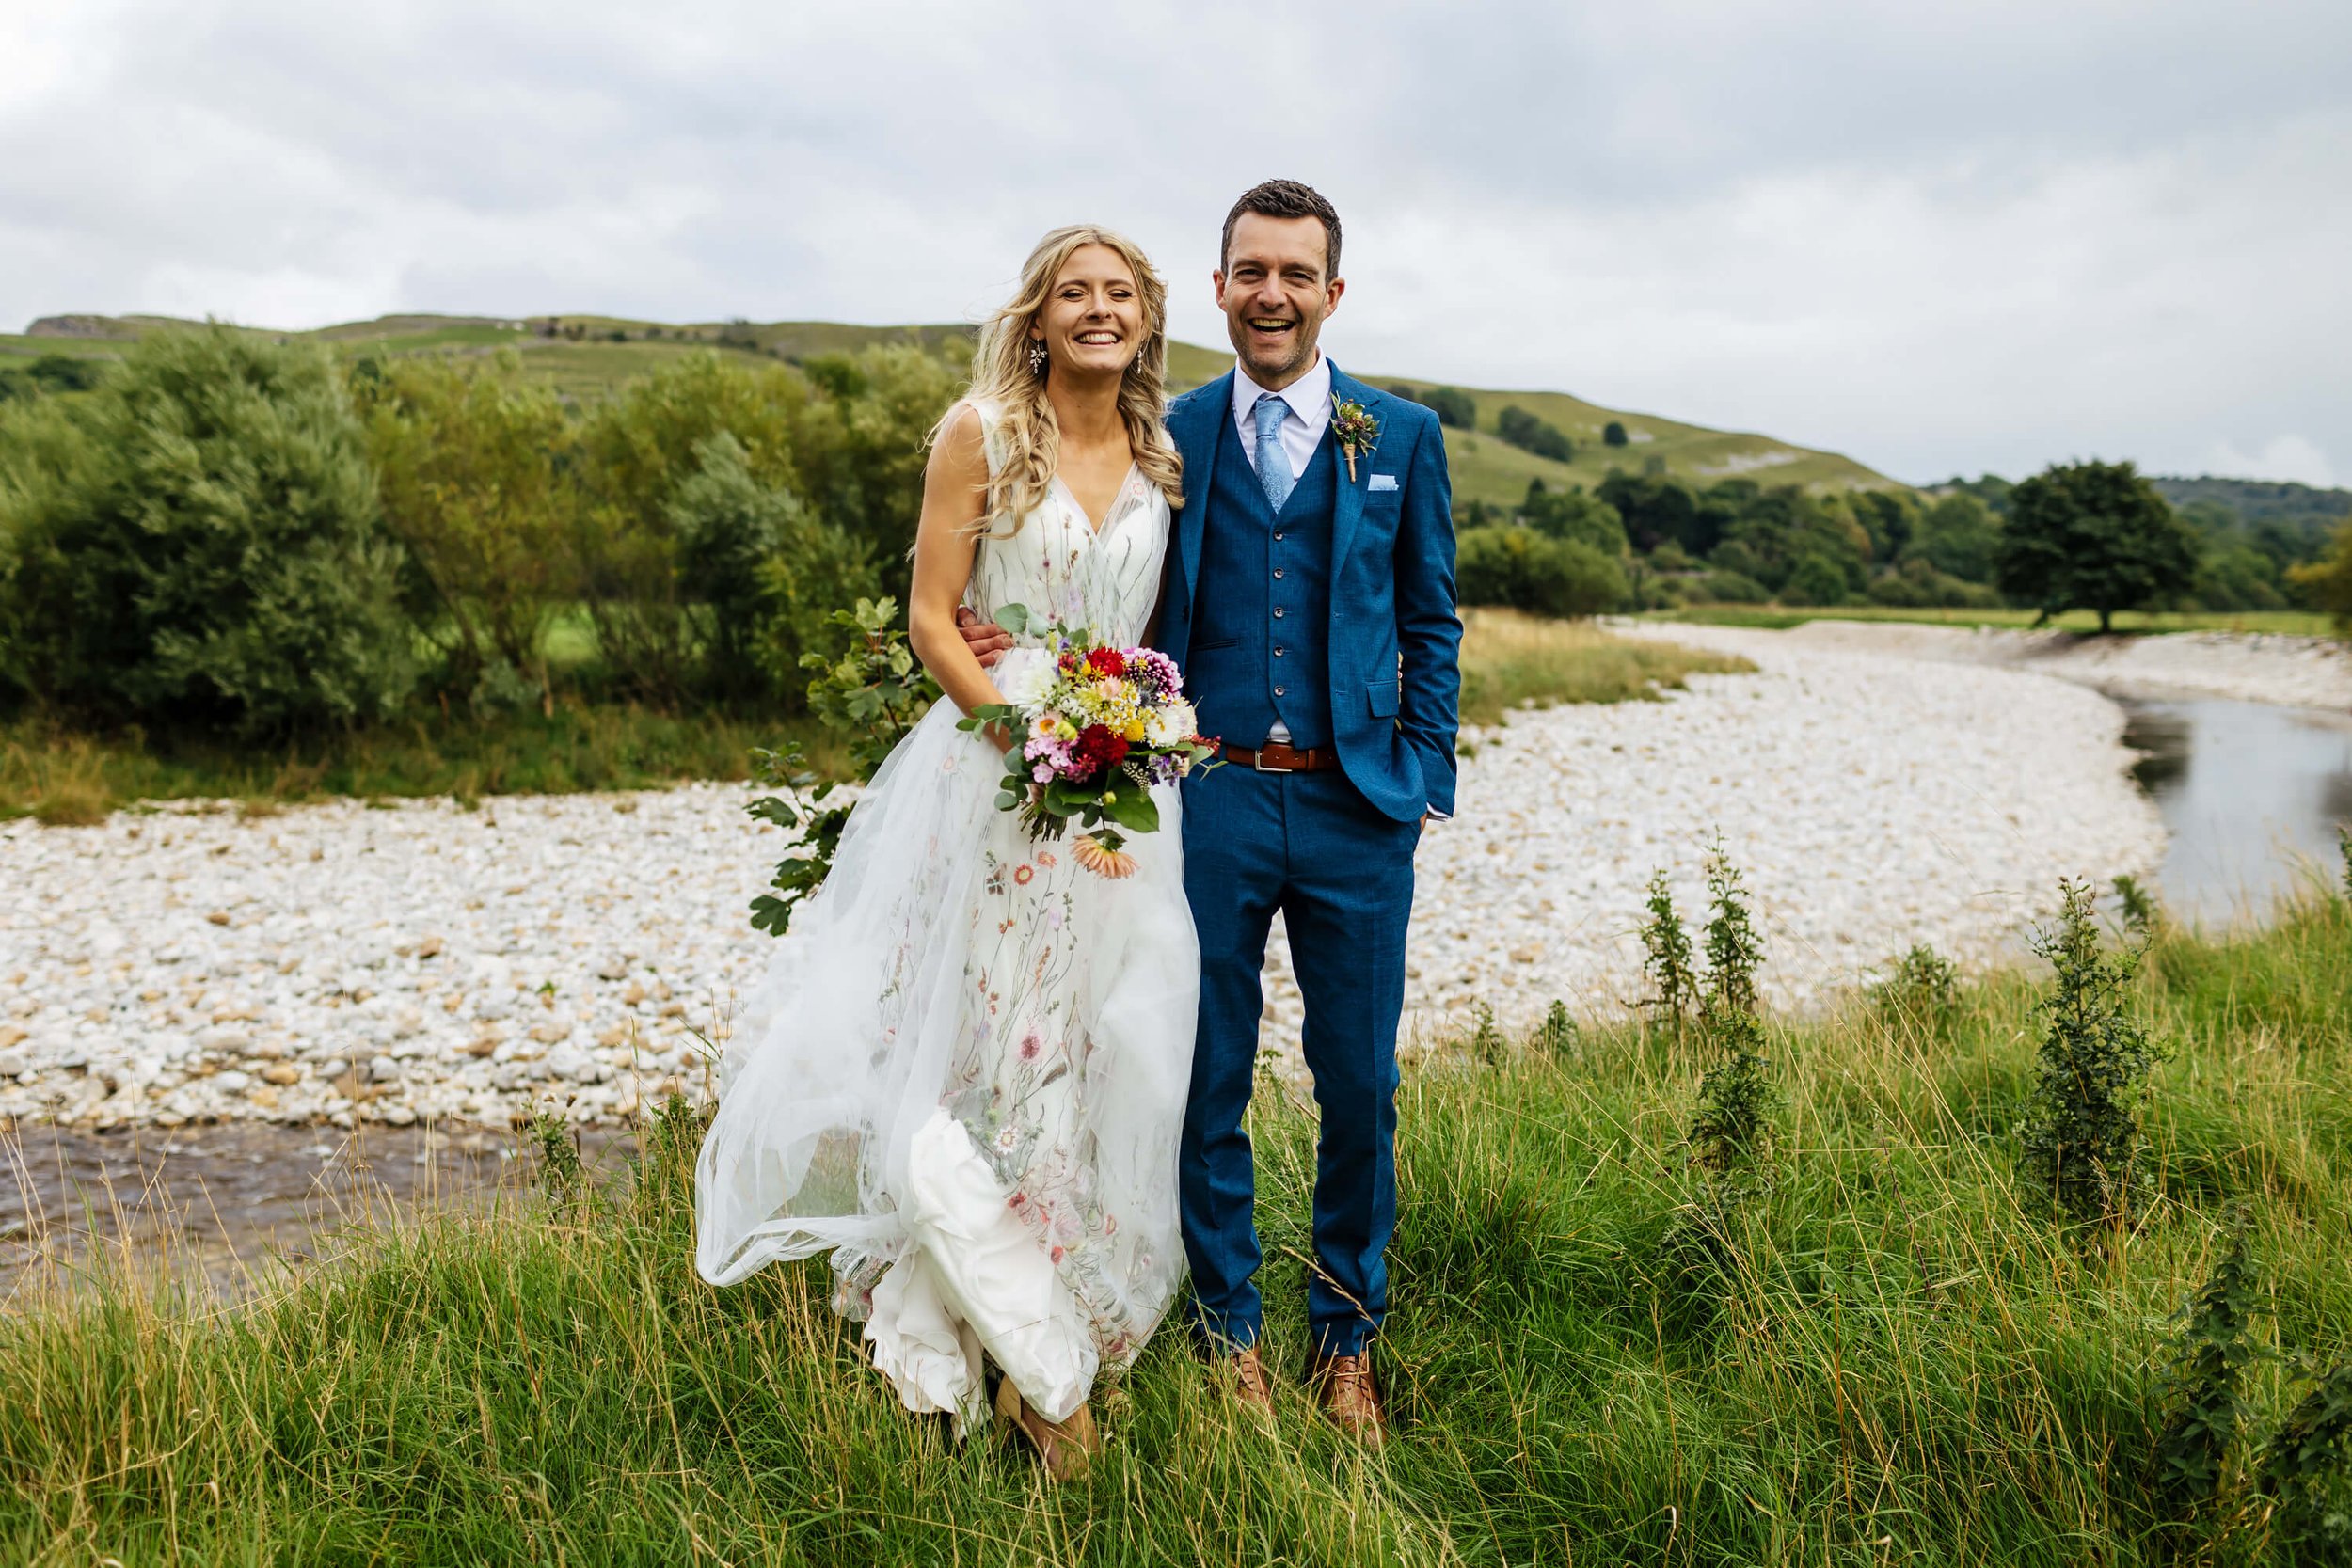 Portrait of a bride and groom at a Yorkshire Dales wedding